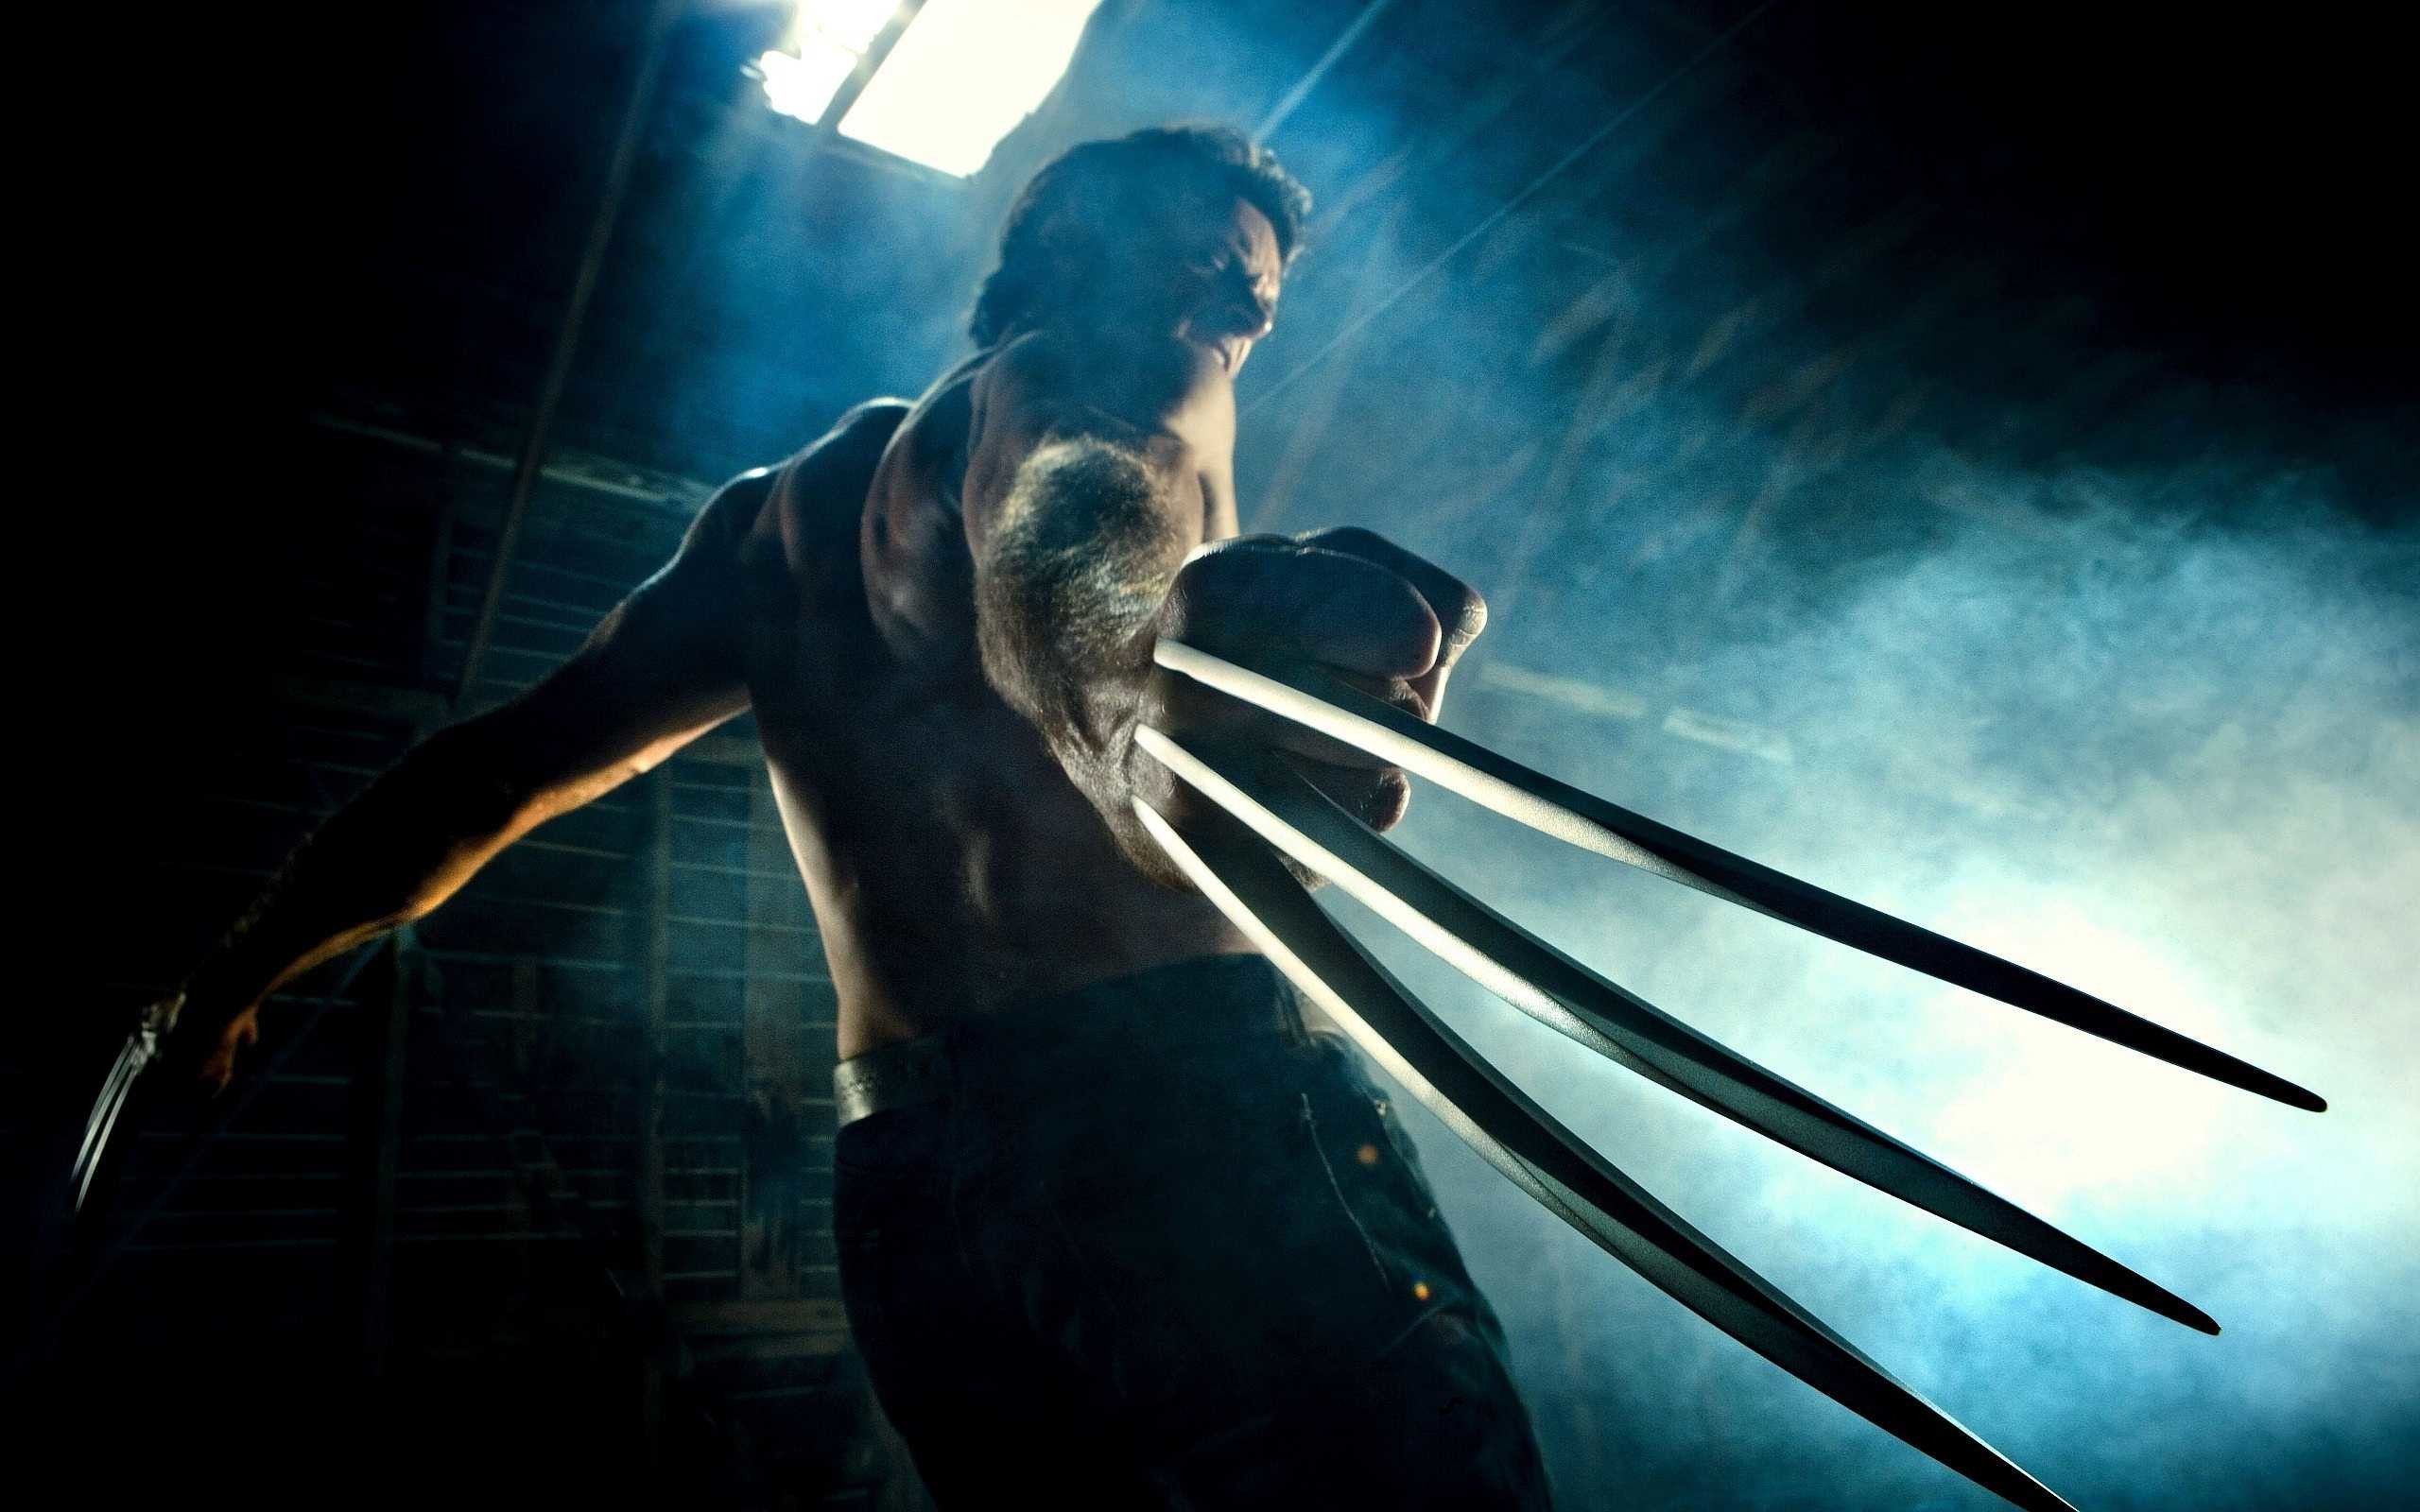 Logan 2017 Poster HD wallpaper 2016 for FREE. Download Desktop Background in category Logan Wolverine for Fullscreen PC, mobile, iPhone